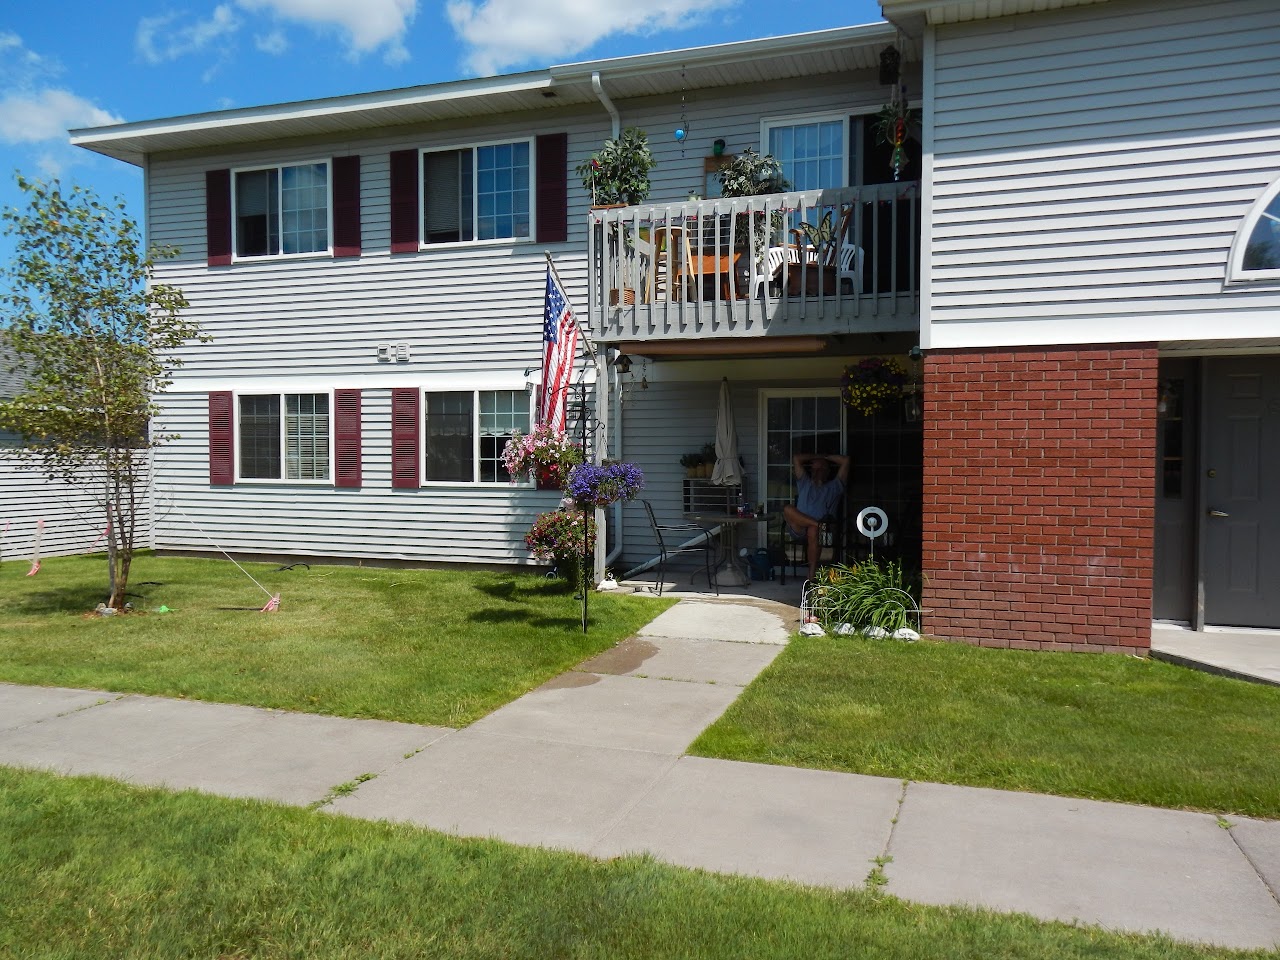 Photo of NORTHERNAIRE APTS. Affordable housing located at 1605 OAKES AVE SUPERIOR, WI 54880